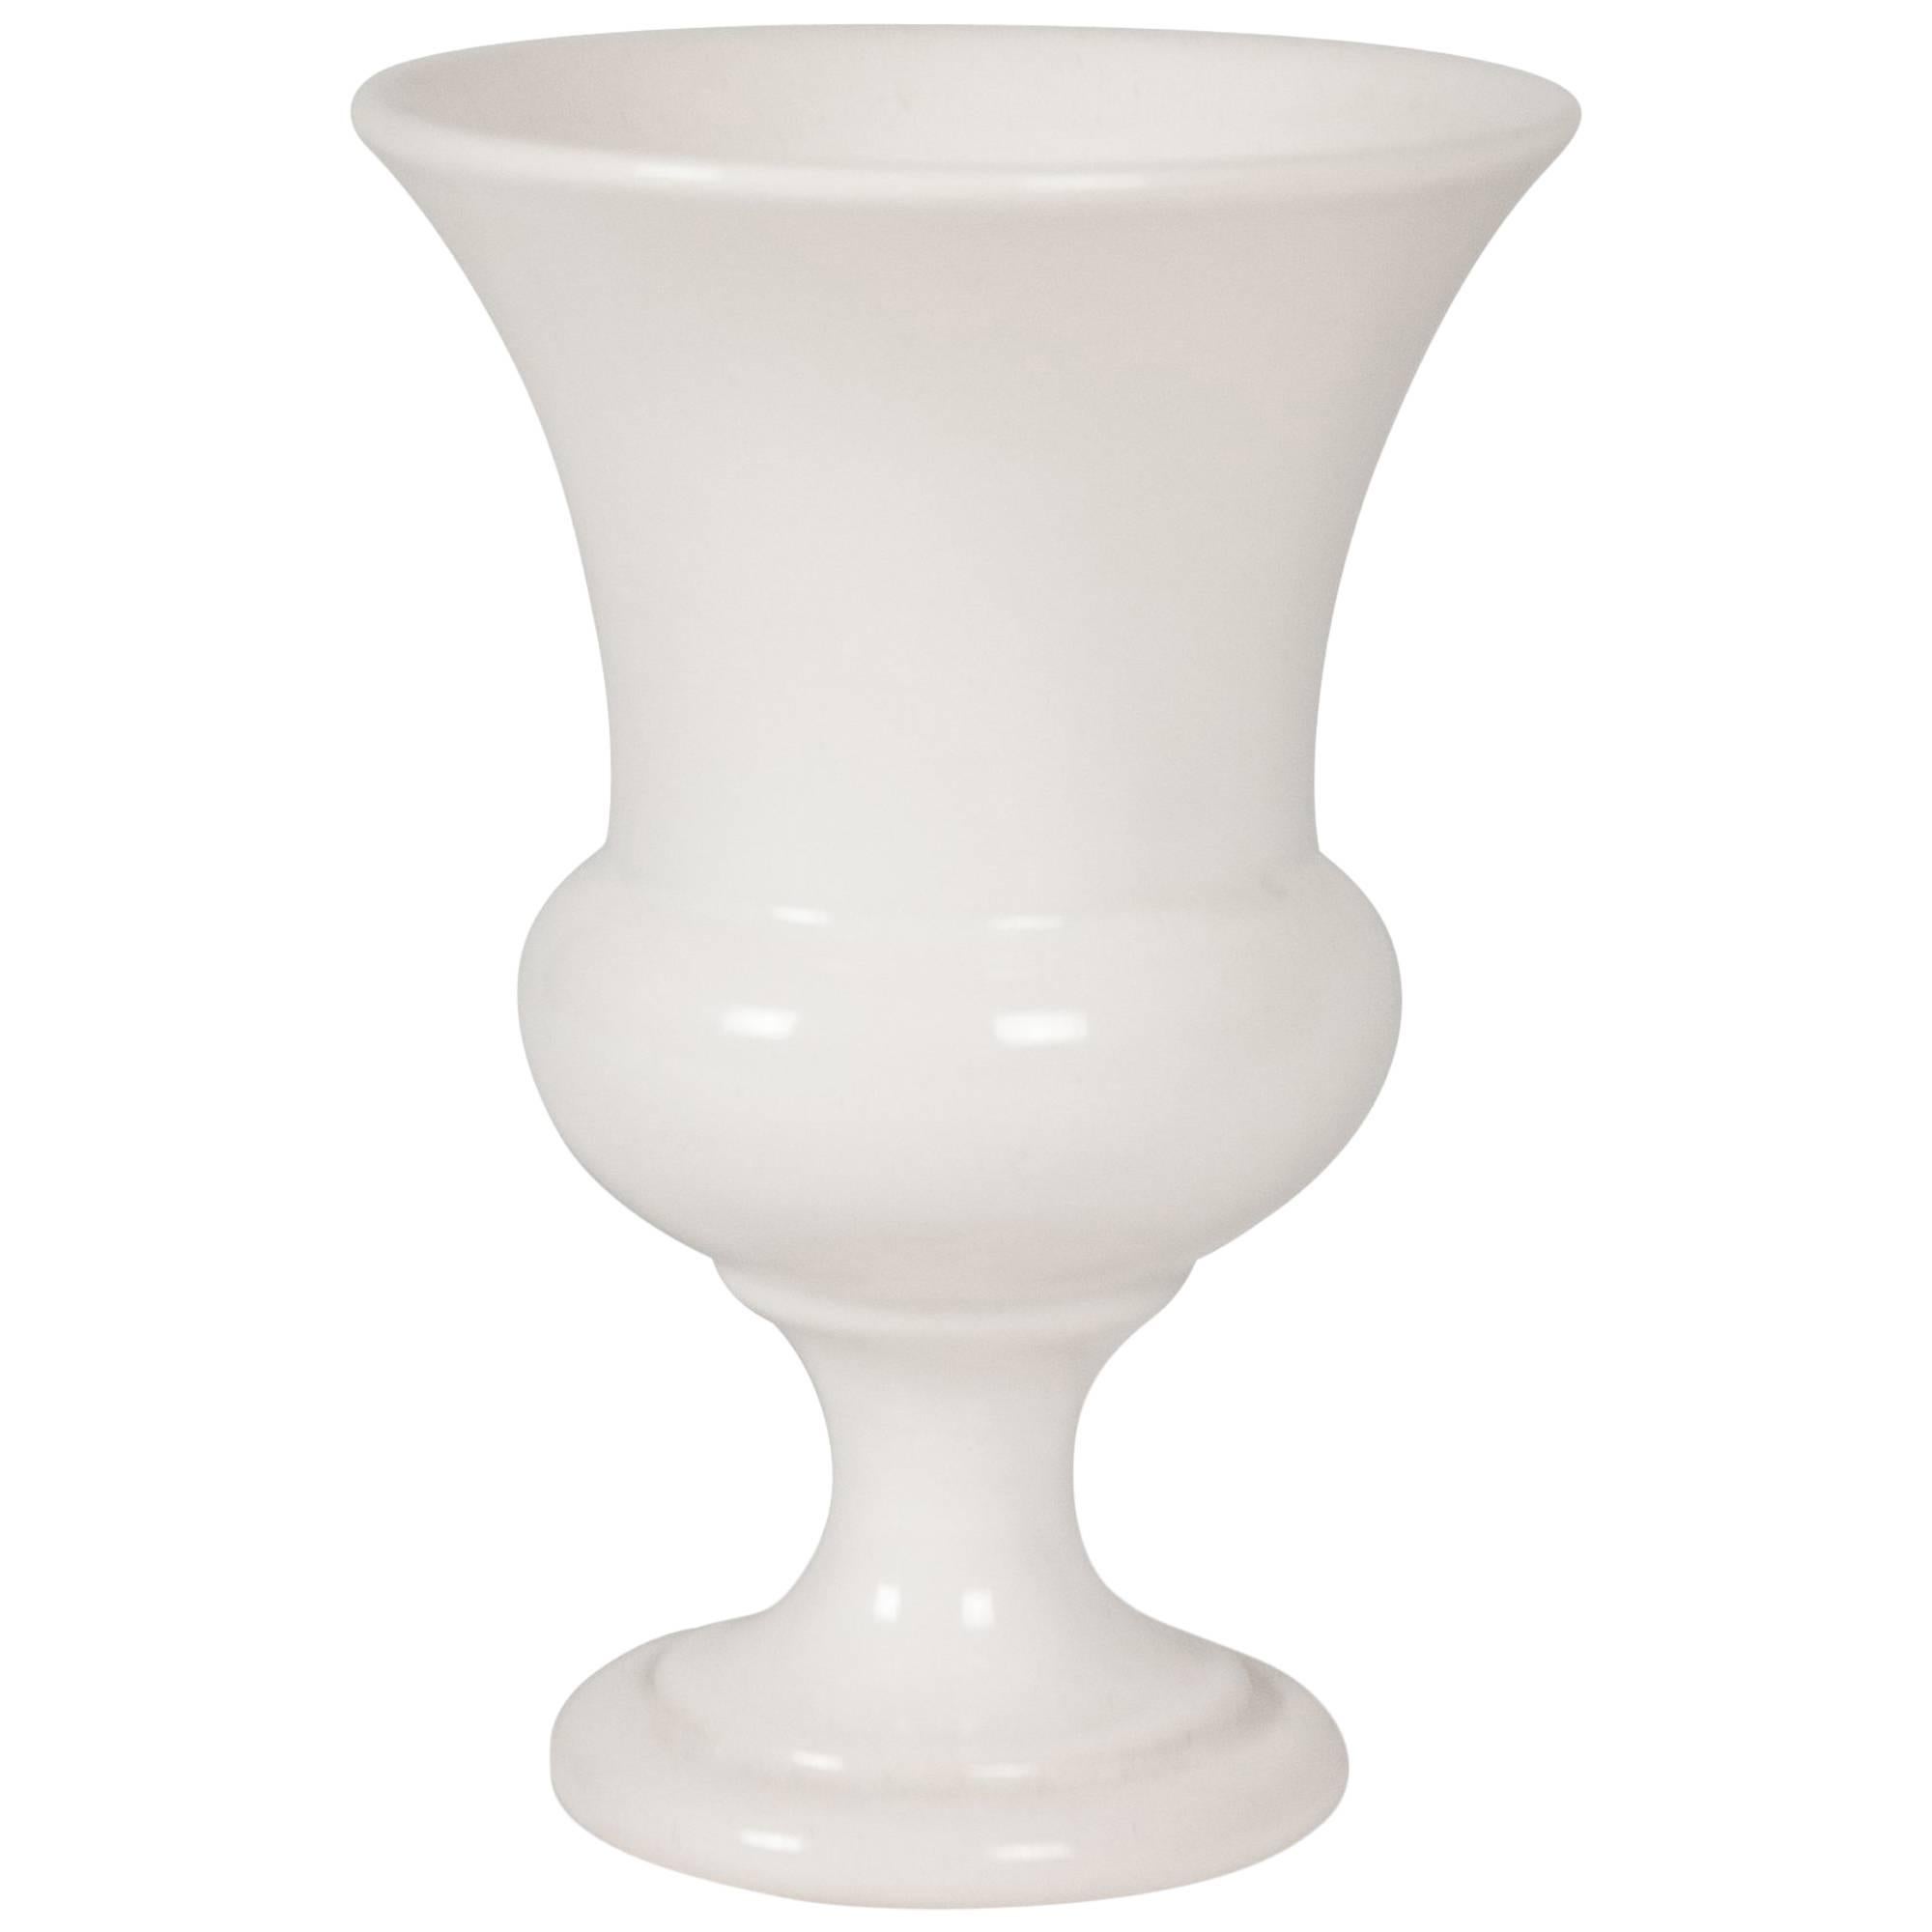 White Ceramic Urn Form Vase by Pol Chambost For Sale